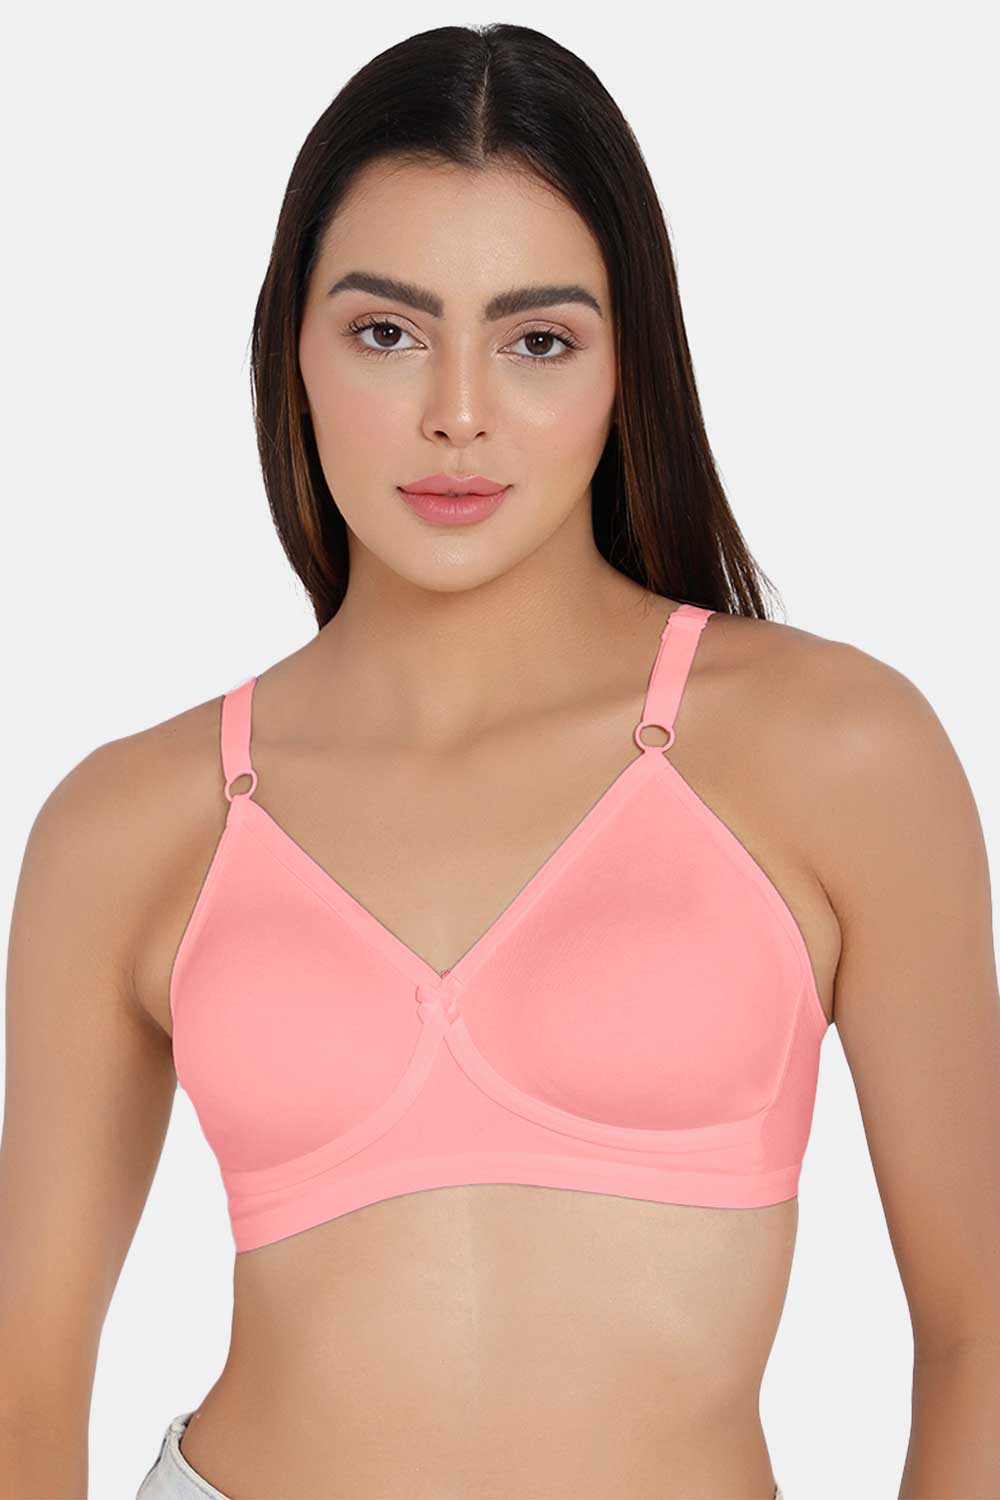 vet-ixioh Womens Plain Full Coverage Bra Comfy Breathable Wirefree